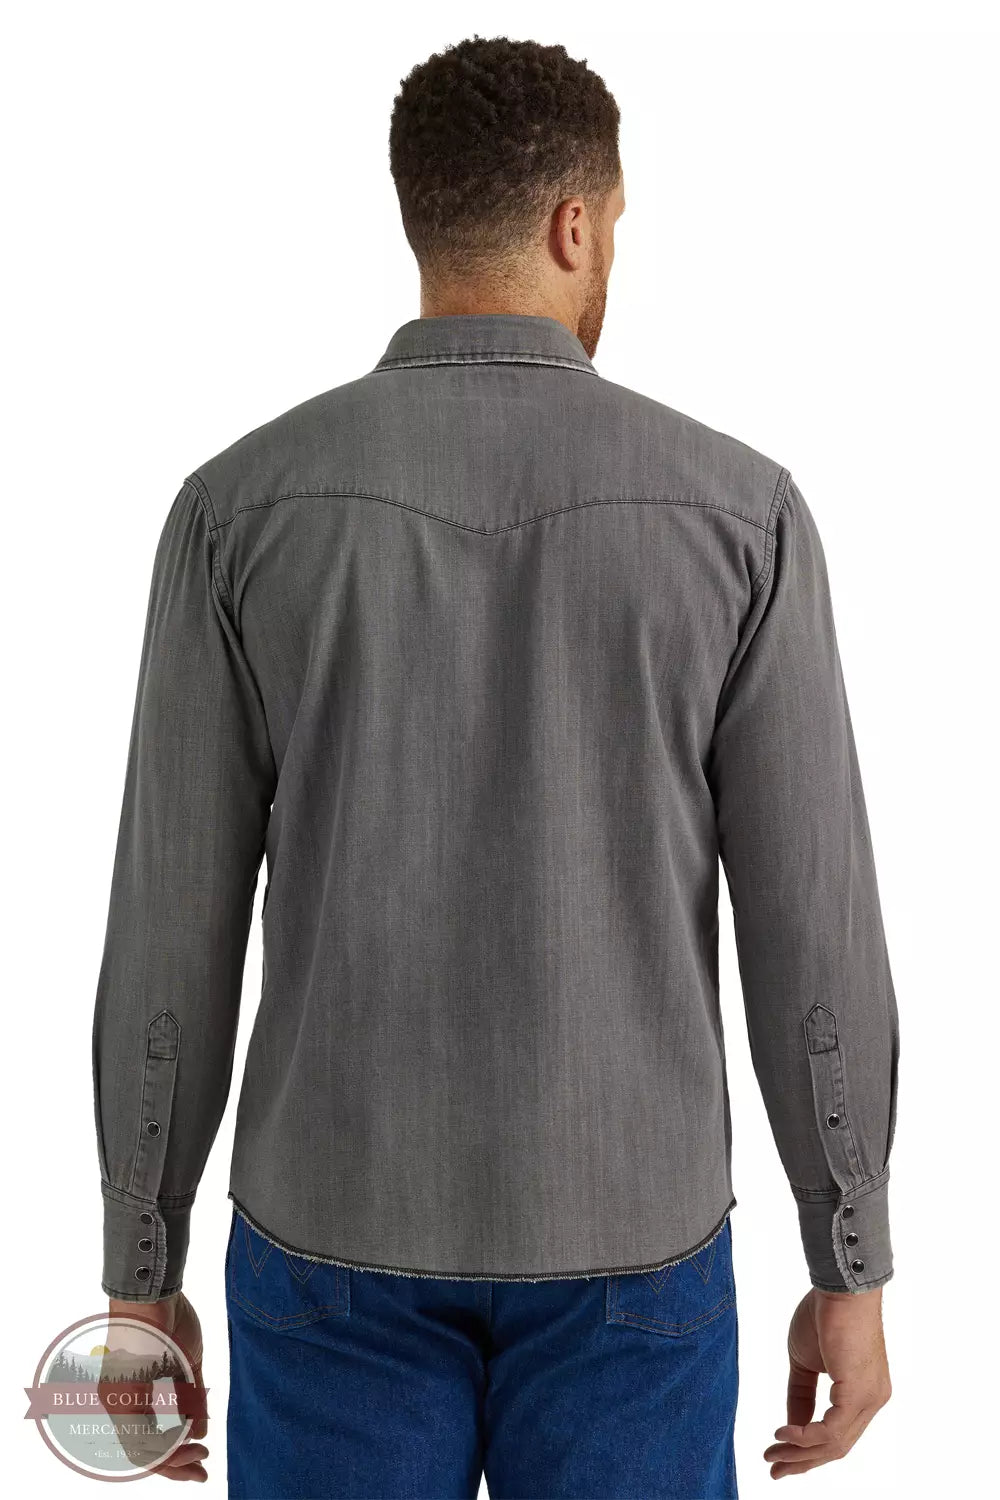 Wrangler 112345071 Vintage-Inspired Long Sleeve Snap Shirt in Fade Black Back View